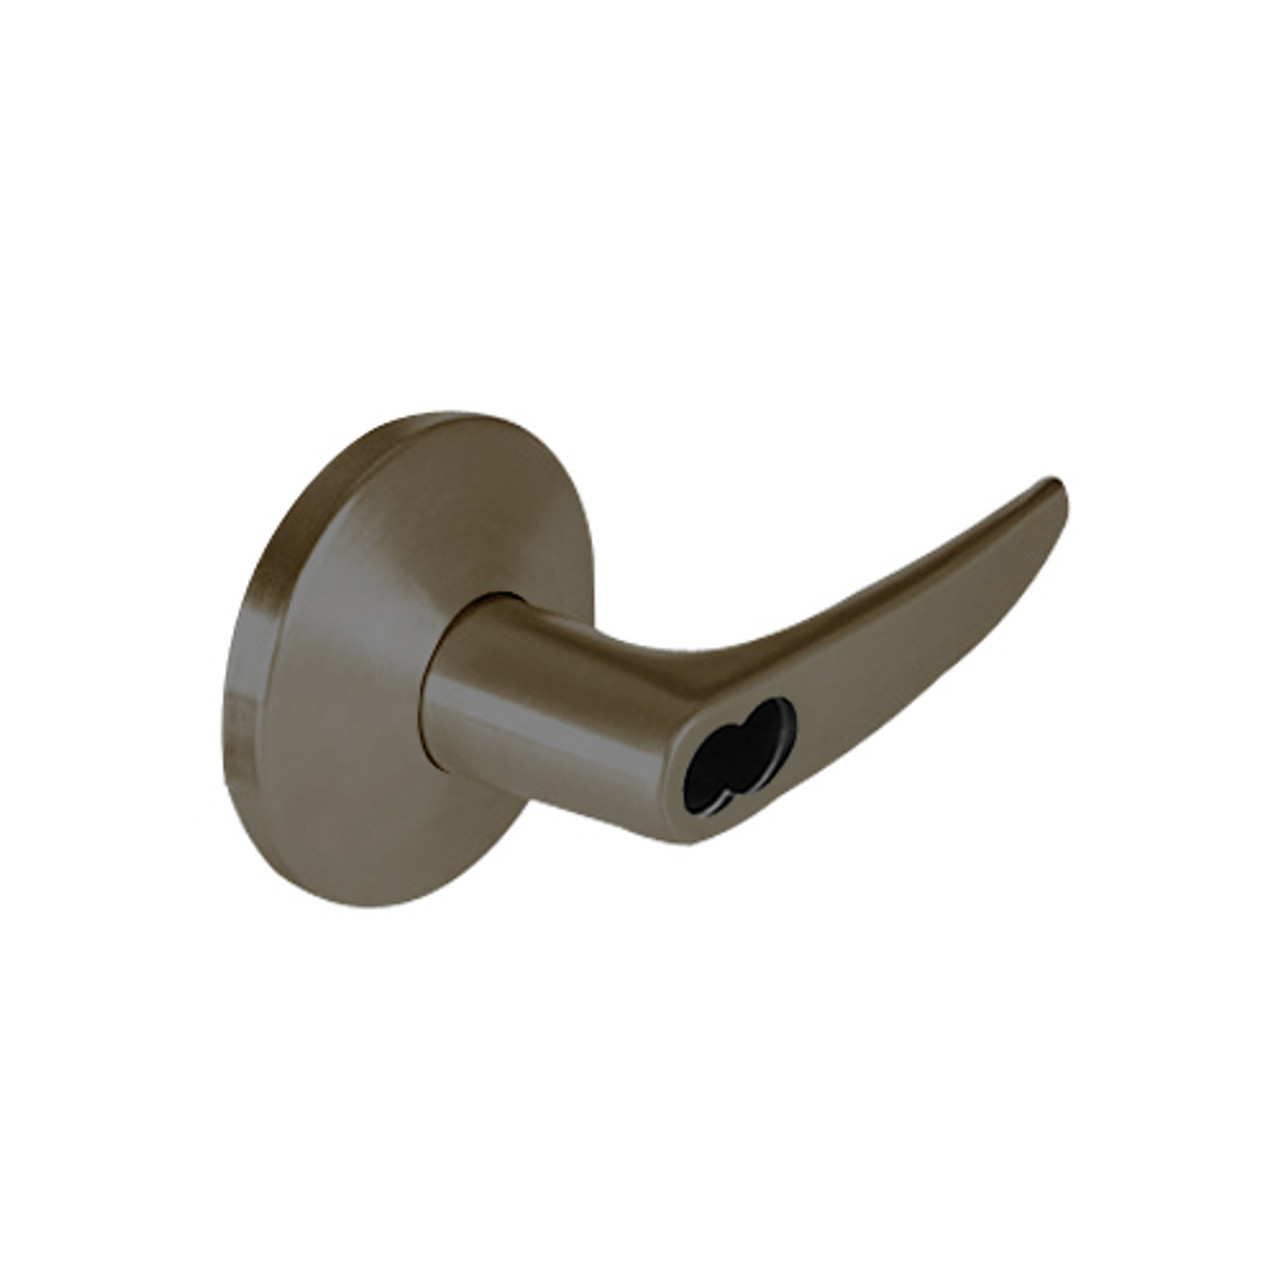 9K37DR16LS3613 Best 9K Series Special Function Cylindrical Lever Locks with Curved without Return Lever Design Accept 7 Pin Best Core in Oil Rubbed Bronze